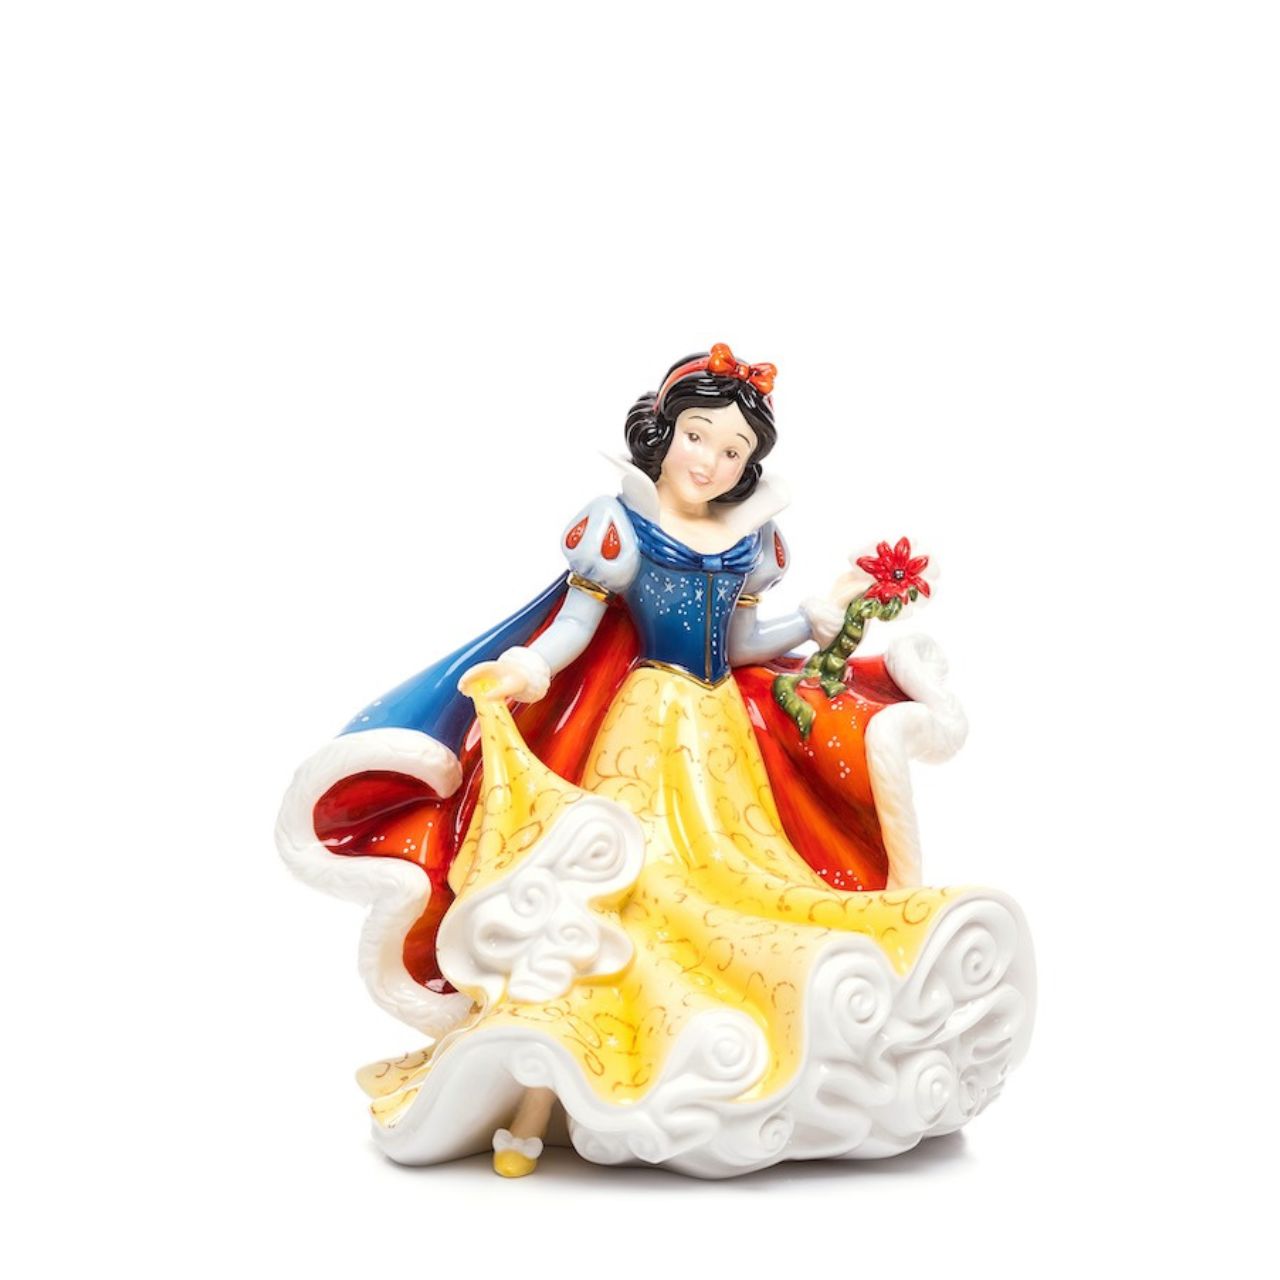 Disney Classic Snow White Disney Princess Figurine  Our gorgeous Snow White figurine is the first of our Disney Princesses which is made in a limited edition. Only 3000 will be made – worldwide – so make sure you get yours before they sell out.